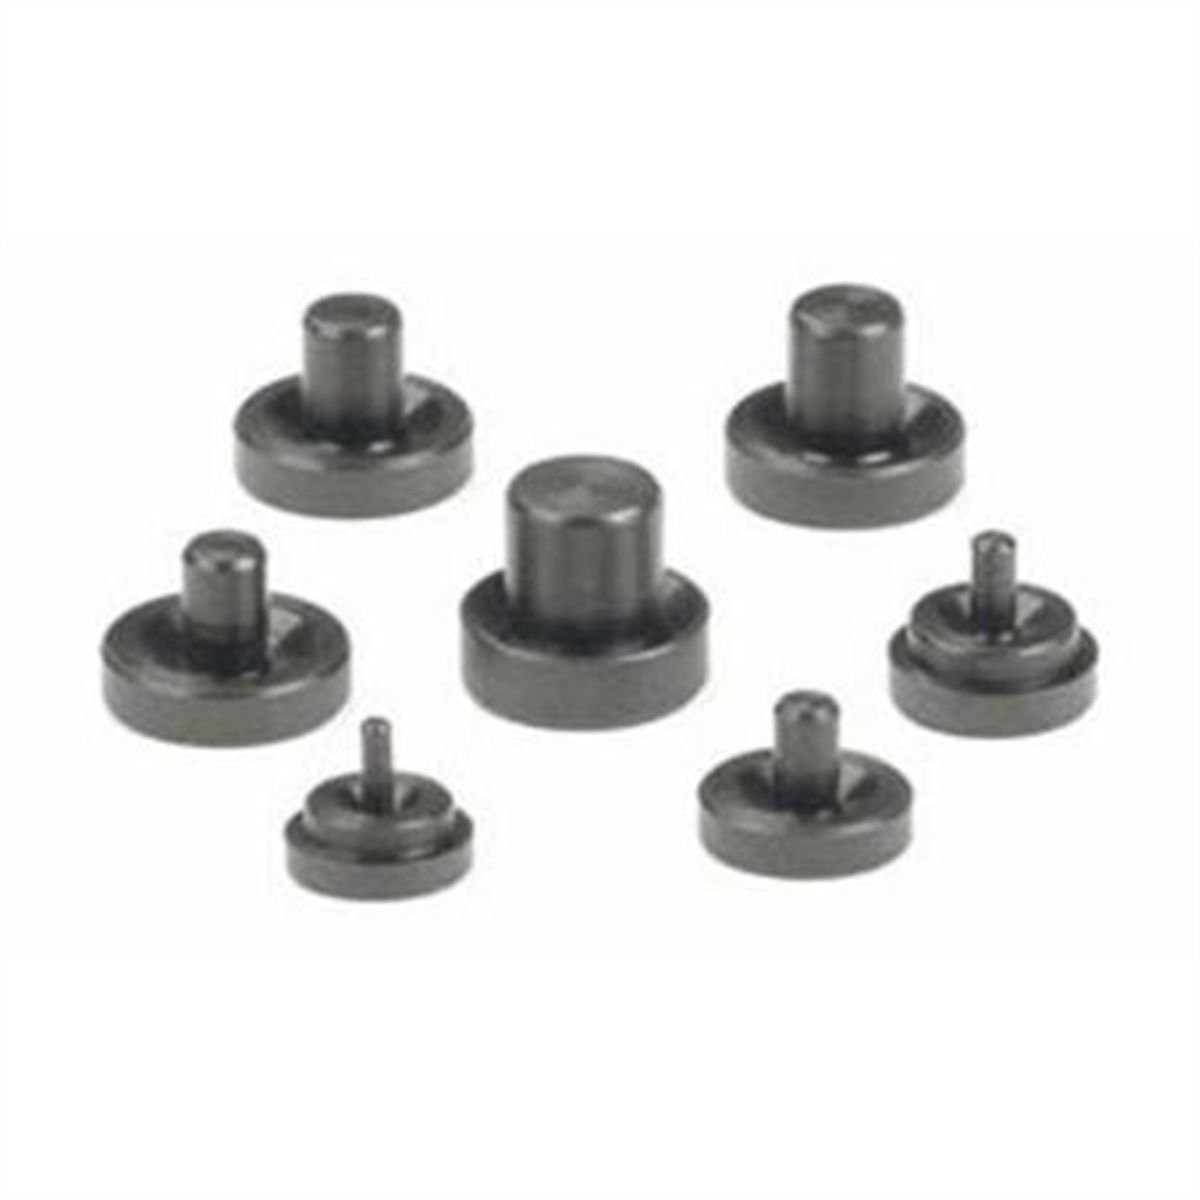 7PC DOUBLE FLARING ADAPTER SET FOR 41880